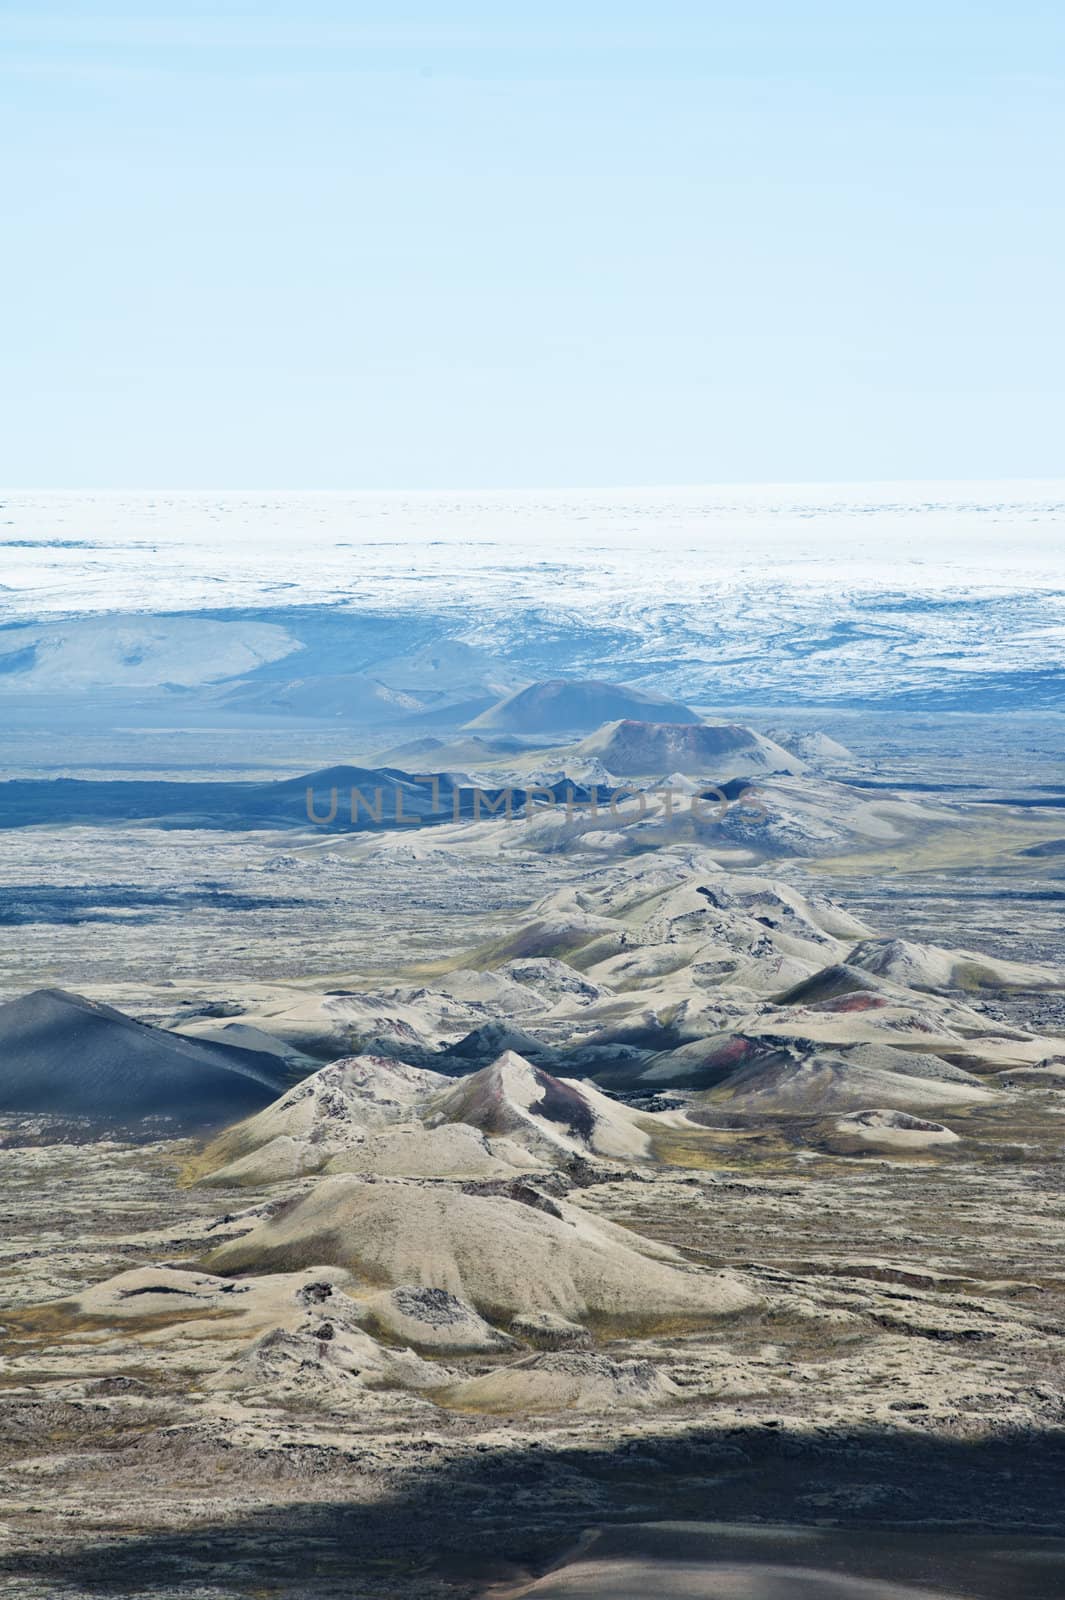 Lakagigar is a row of appox. 130 volcanic craters on the Southern Iceland. The biggest one is the volcano Laki the eruption of which was one of the greatest disasters in the 18th century. 